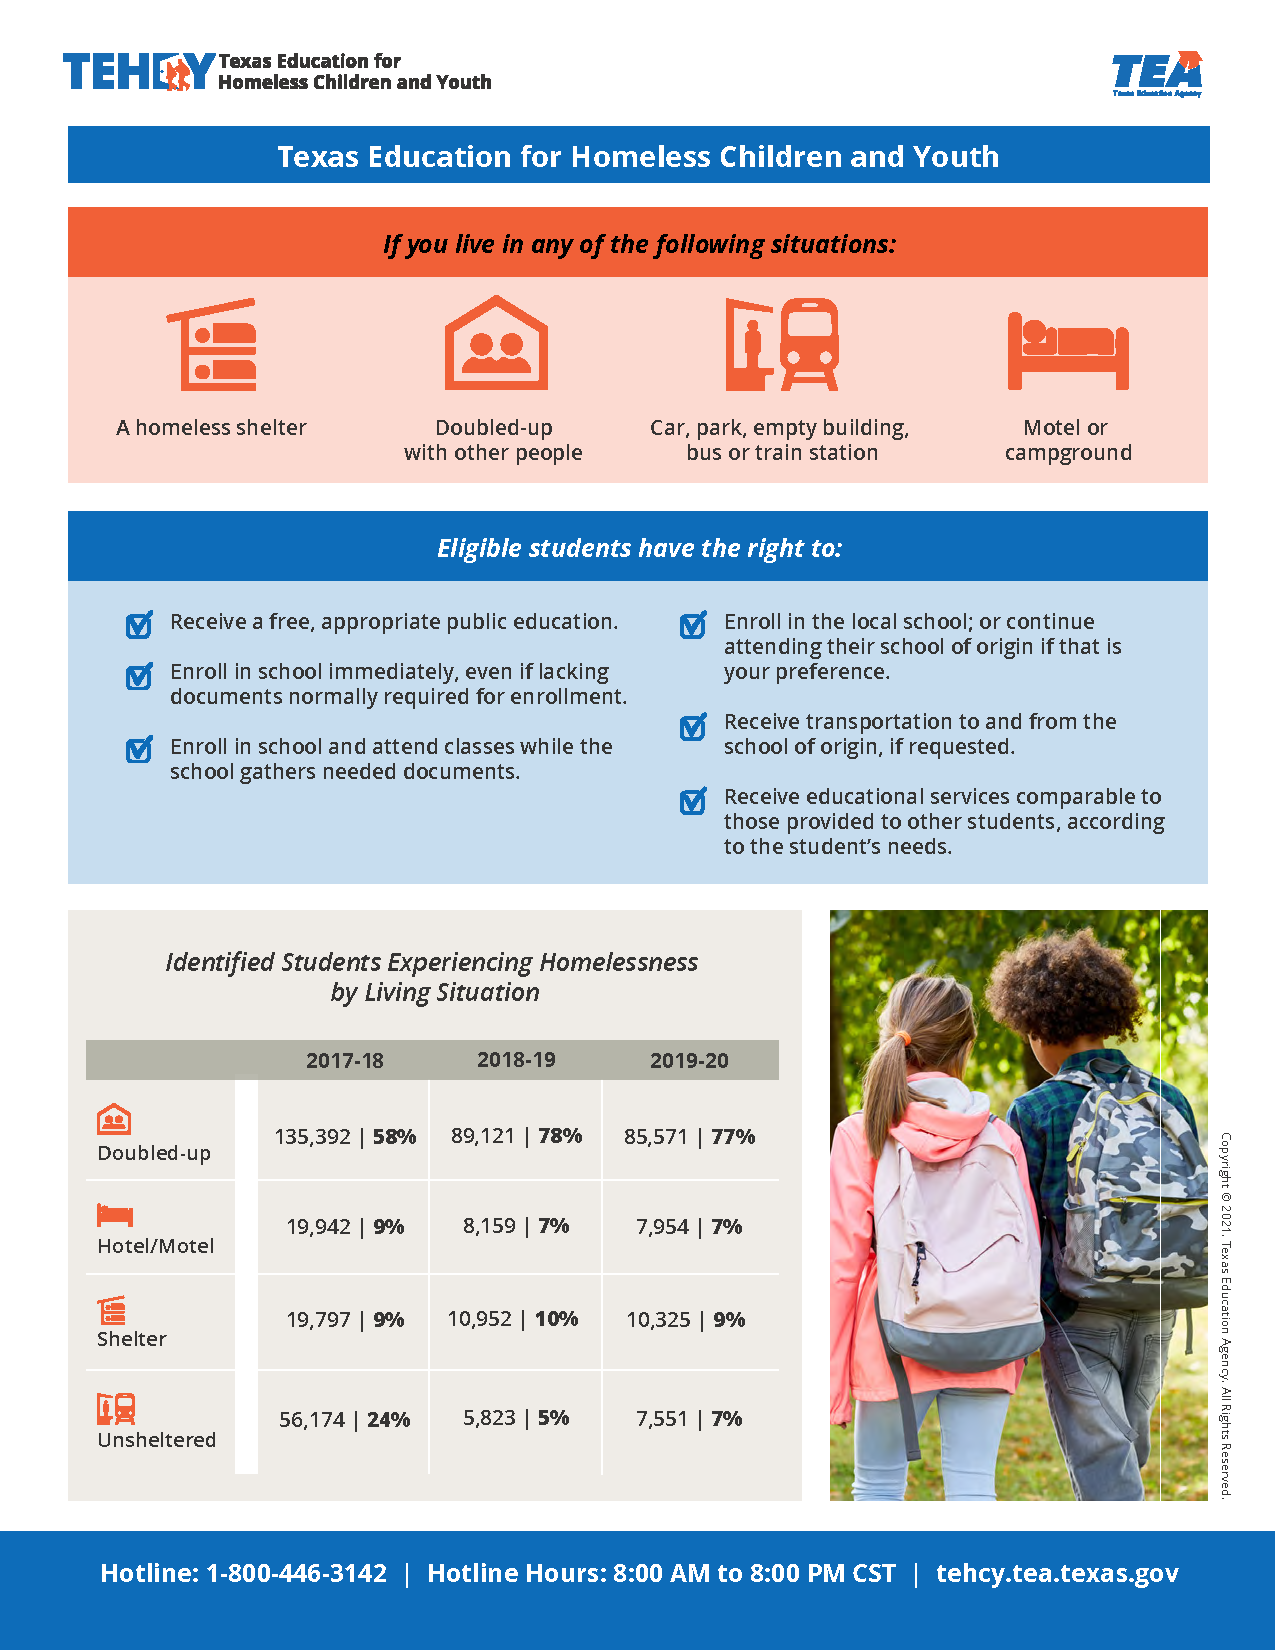 TEHCY Infographic 2018-2020 Texas Education for Homeless Children and Youth Data